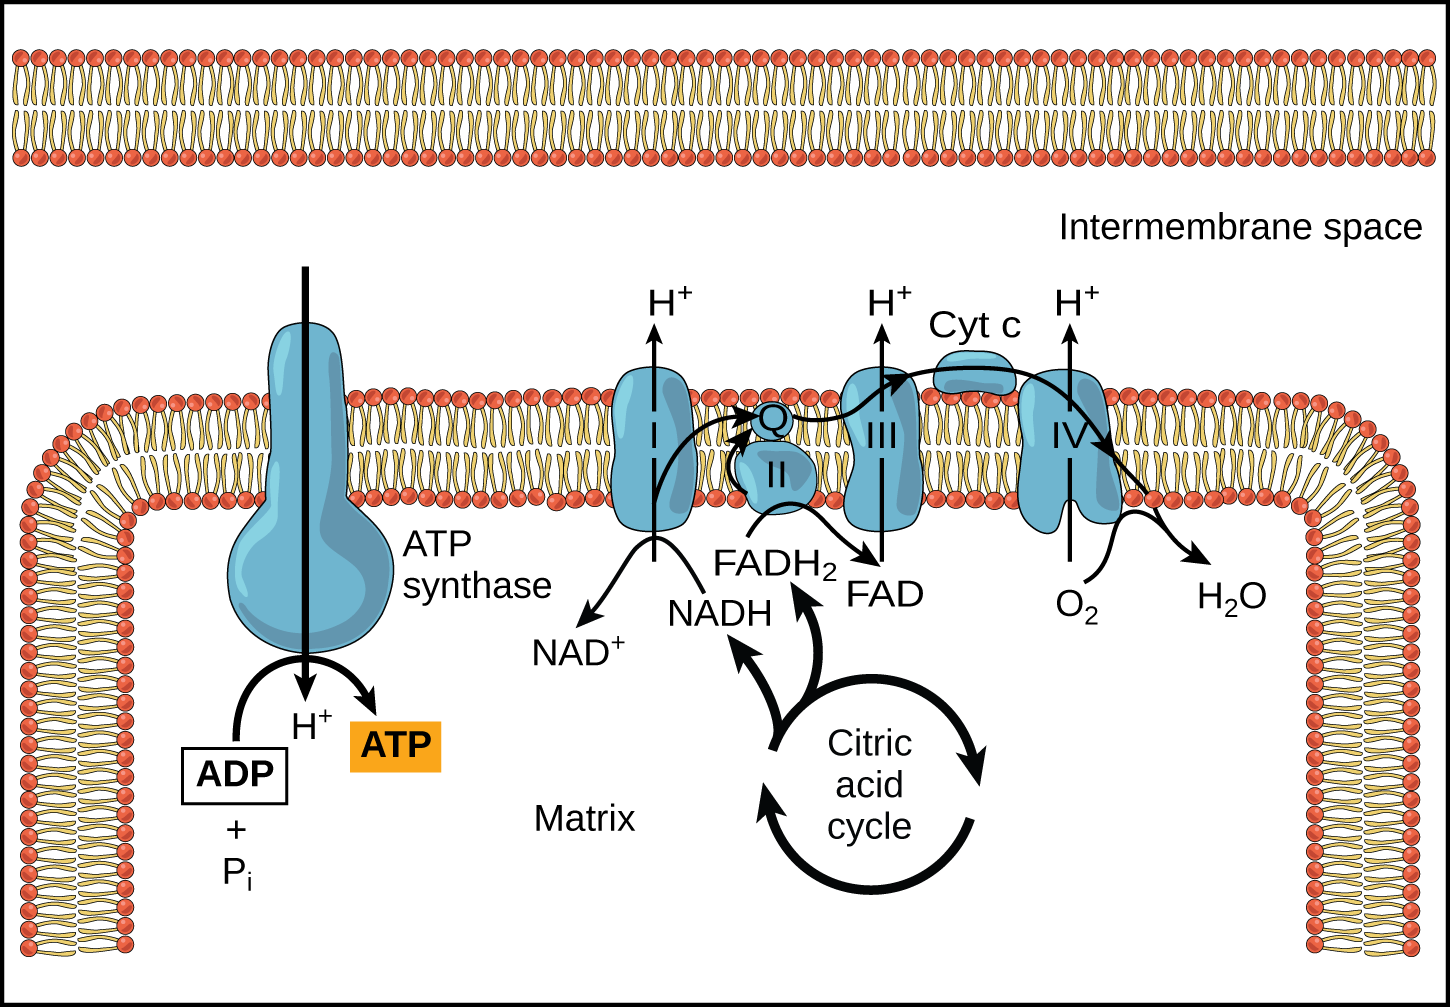 This illustration shows the electron transport chain, the A T P synthase enzyme embedded in the inner mitochondrial membrane, and the citric acid cycle occurring in the mitochondrial matrix. The citric acid cycle feeds N A D H and F A D H subscript 2 baseline to the electron transport chain. The electron transport chain oxidizes these substrates and, in the process, pumps protons into the intermembrane space. A T P synthase allows protons to leak back into the matrix and synthesizes A T P.